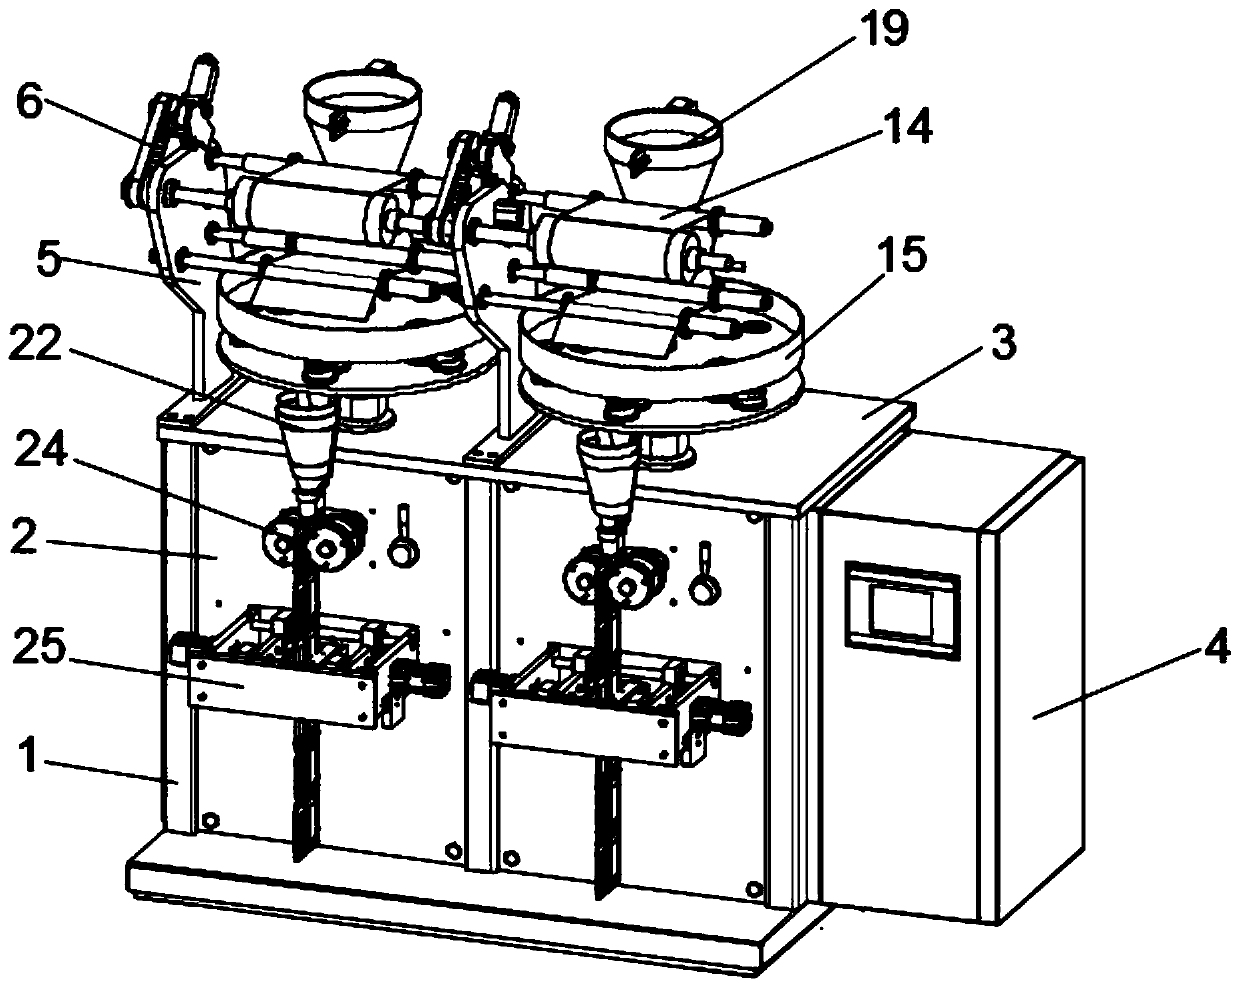 Automatic granule bagging device for food processing